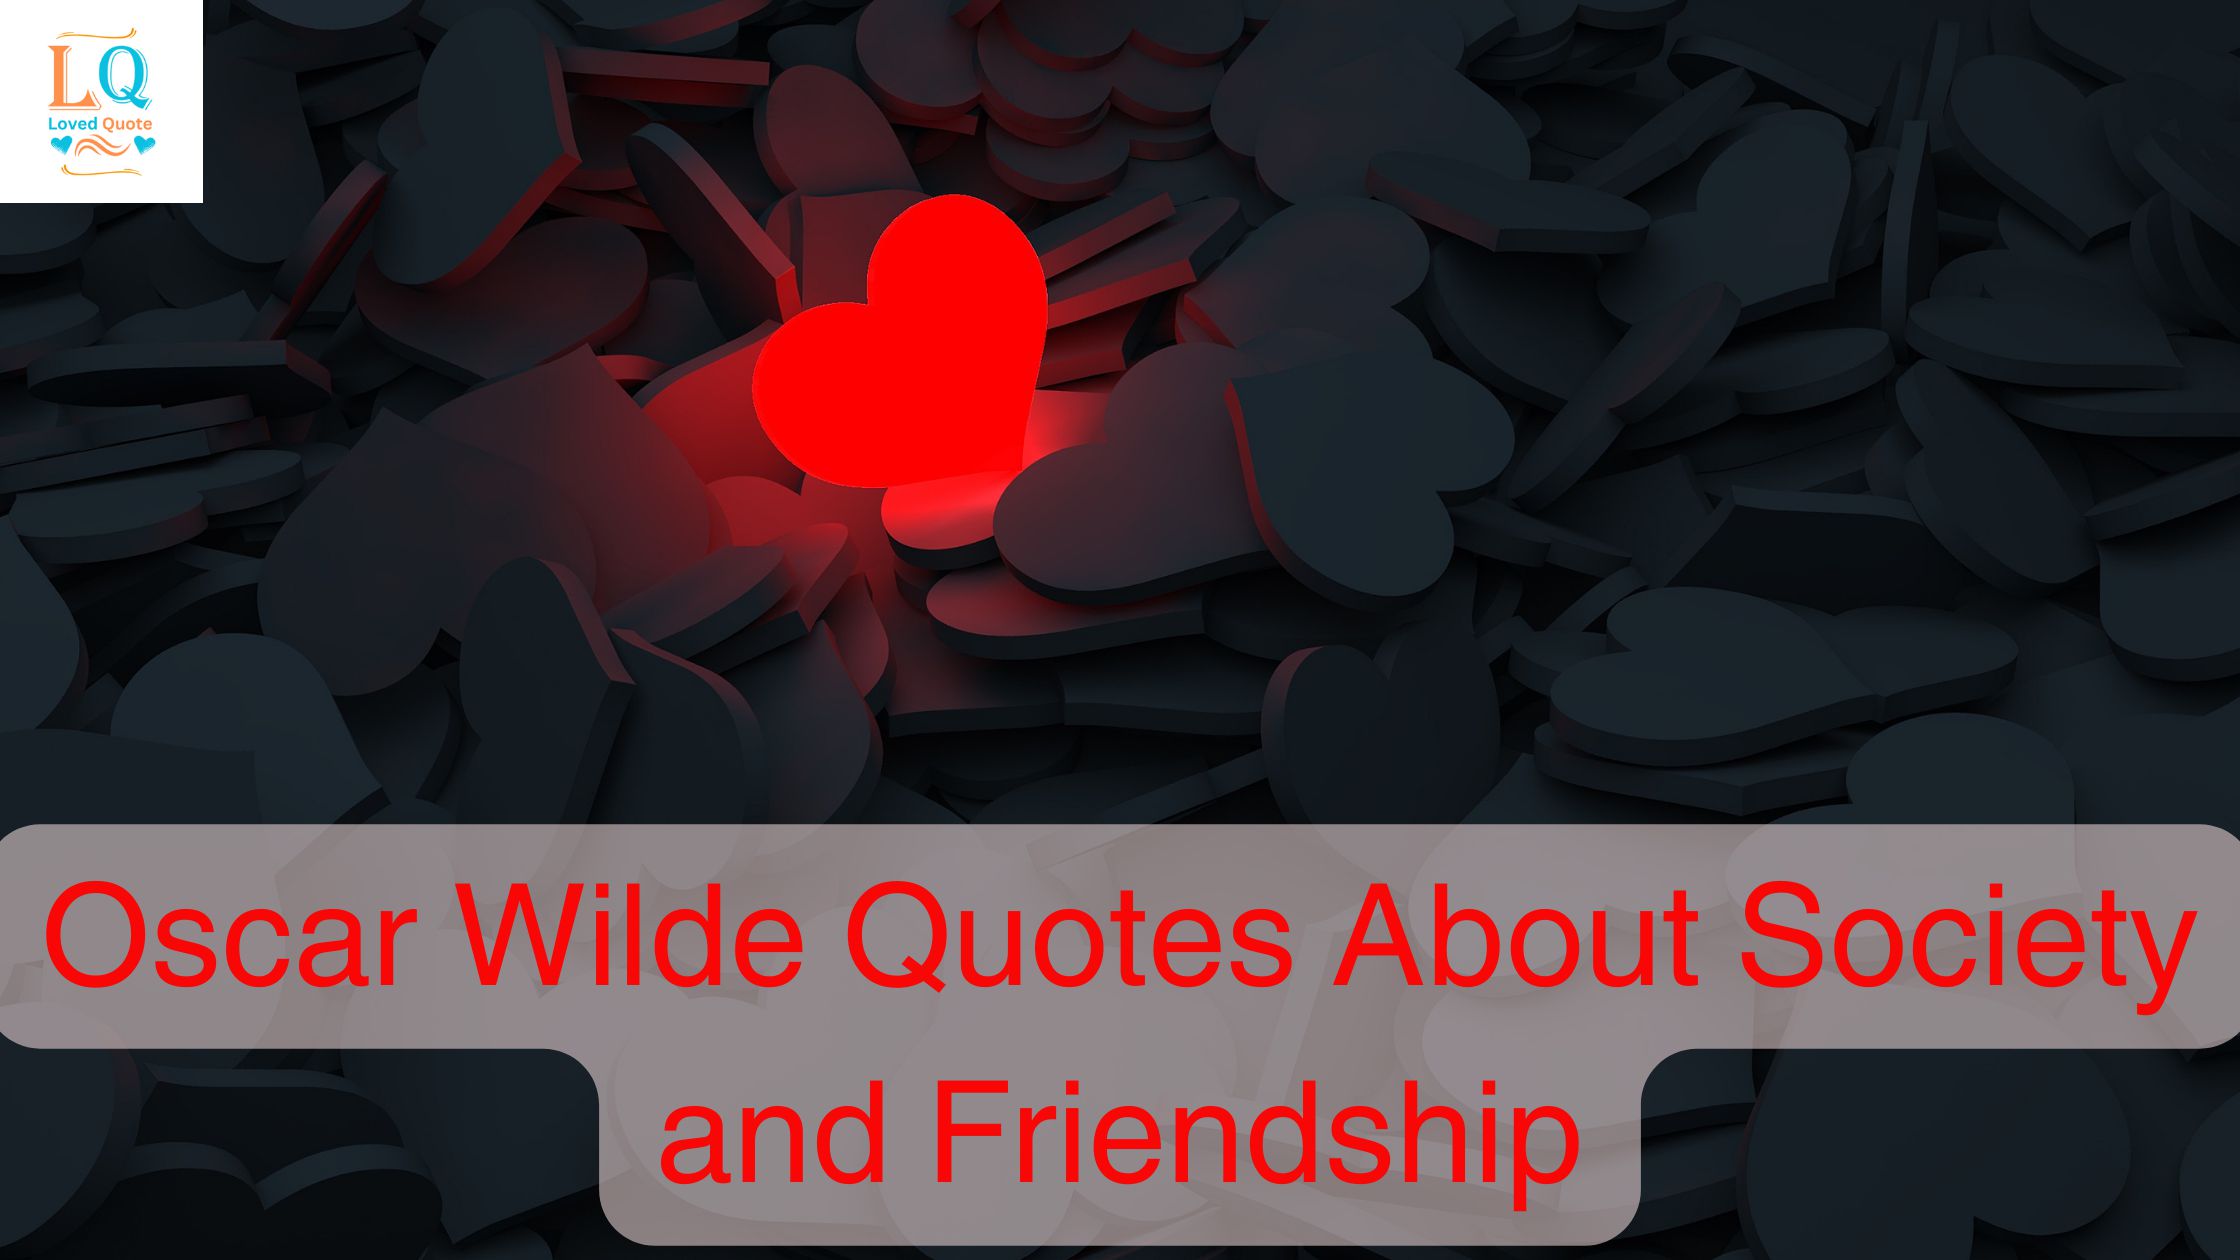 Oscar Wilde Quotes About Society and Friendship